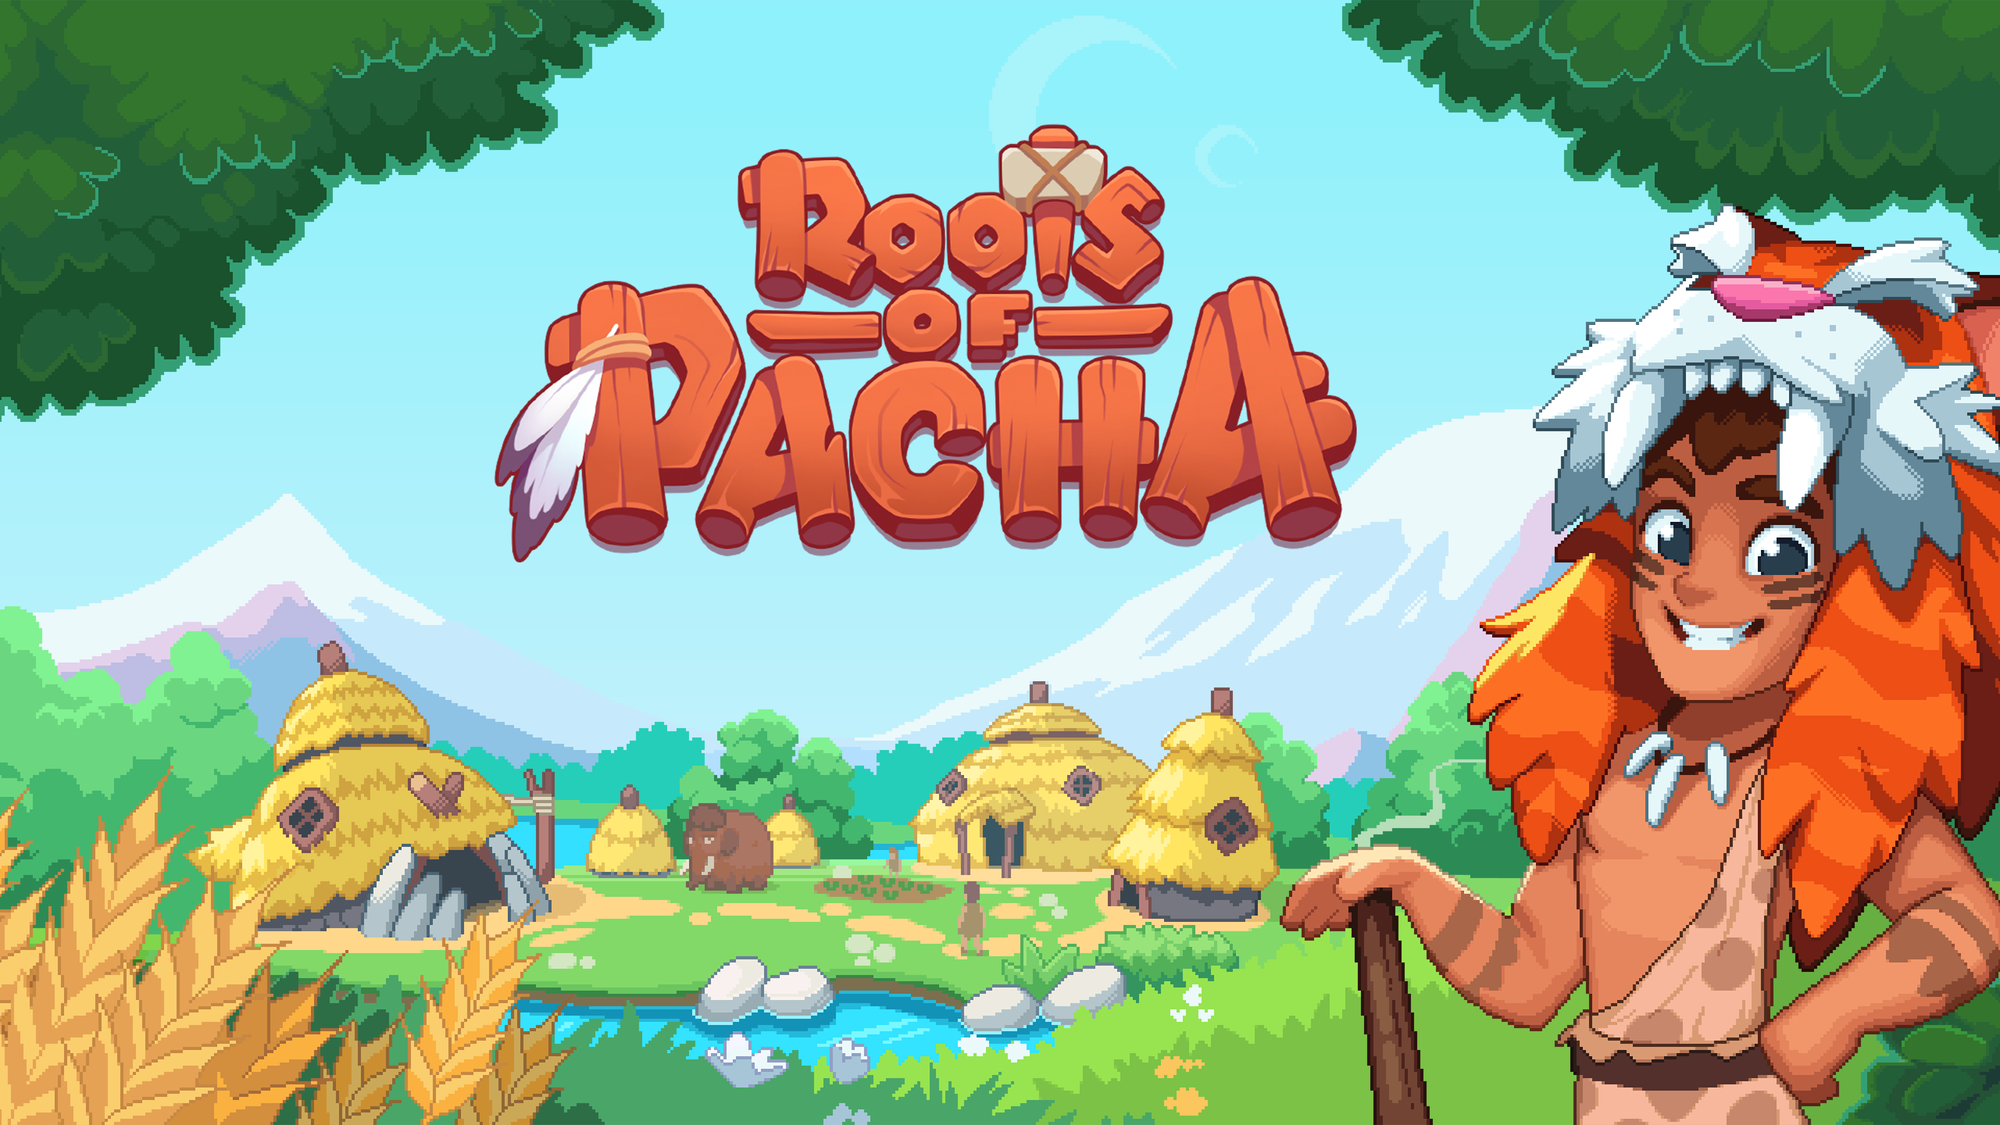 Roots of Pacha - Switch Review